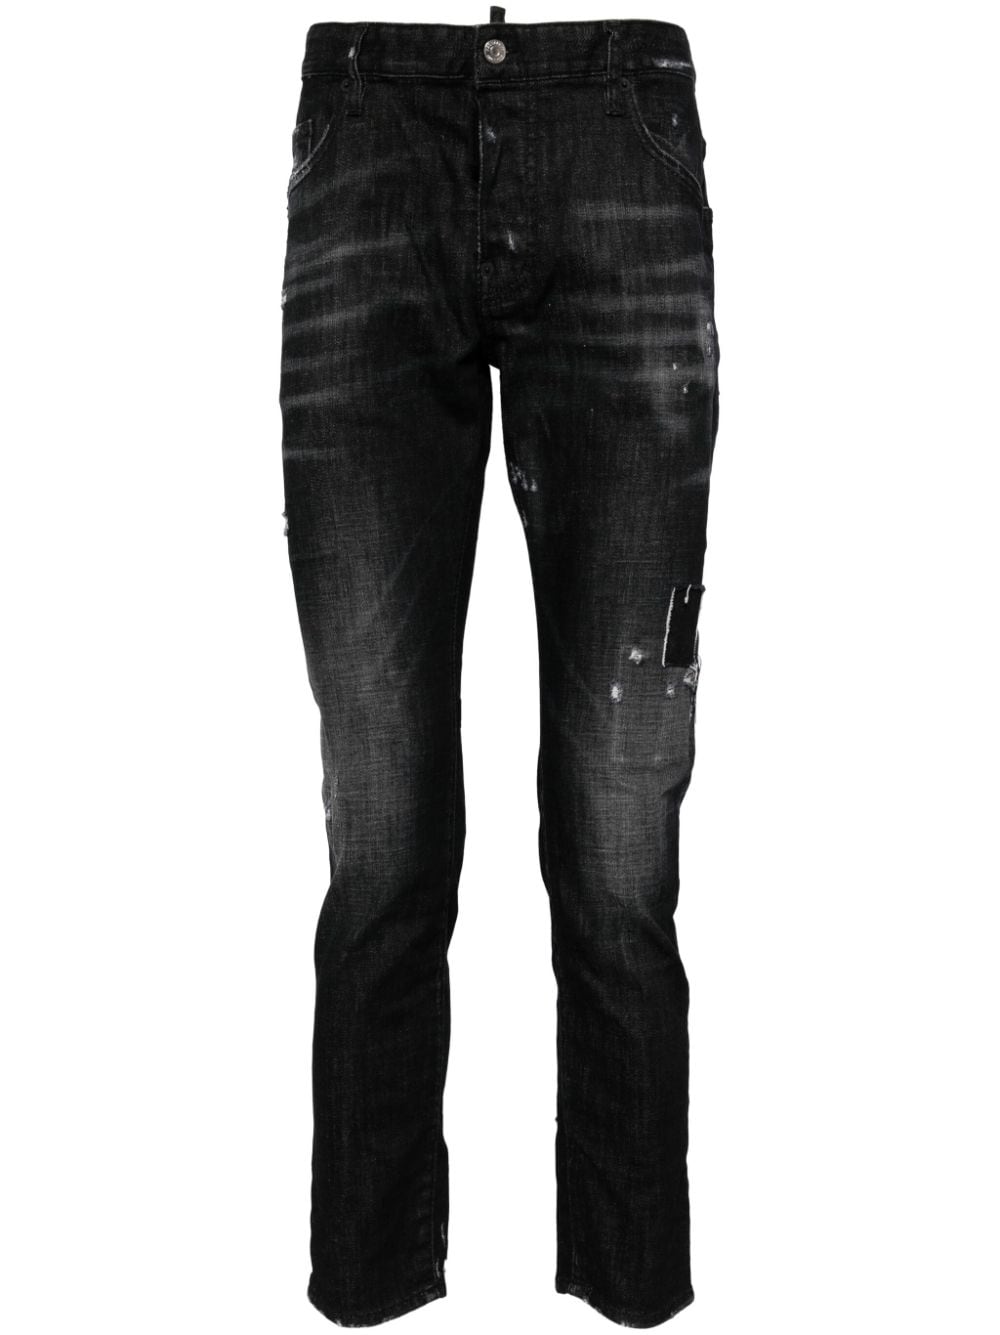 slim-fit distressed-effect jeans